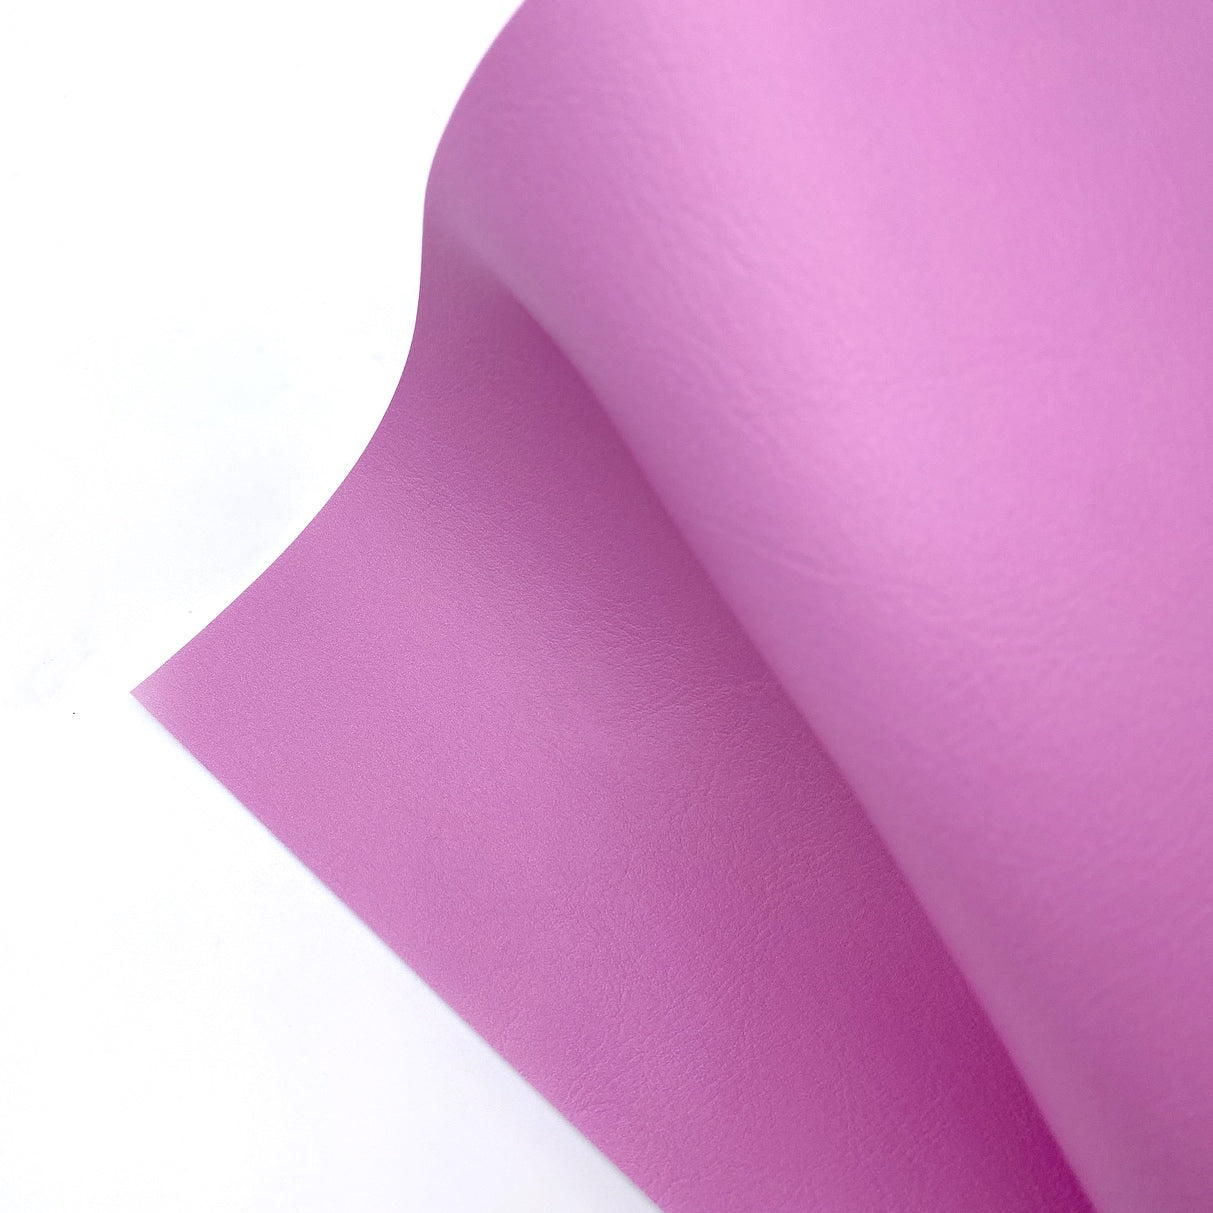 Hottie Pink Premium Faux Leather Fabric Sheets